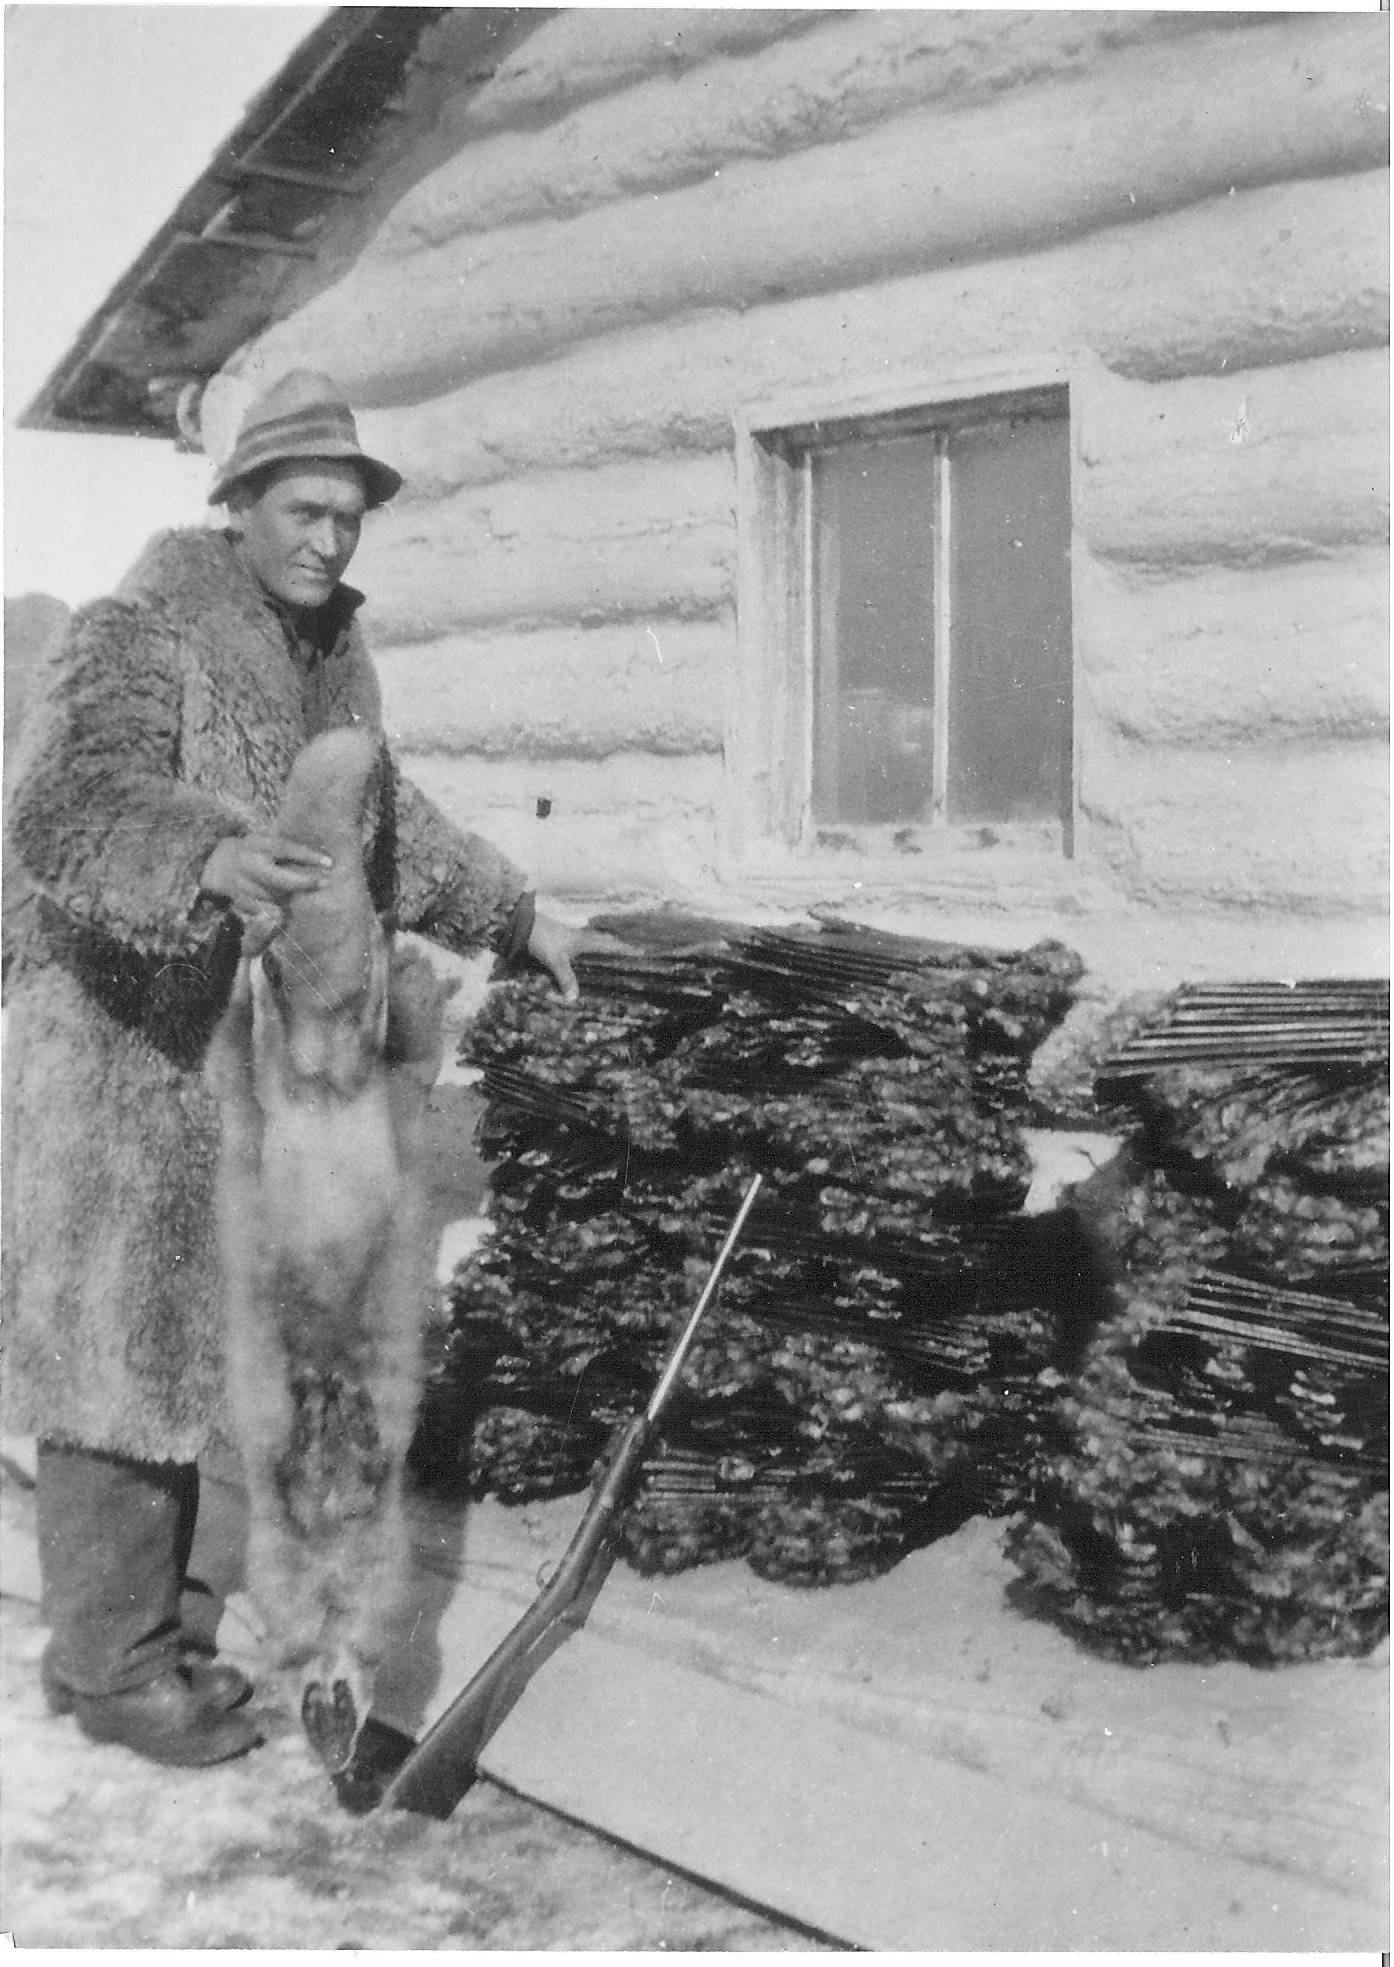 This gentleman has quite a stockpile of pelts, which appear to be stretched and cured. He is also donning a thick fur coat. Unfortunately we don't have any leads on who he might be - let us know if you do!
990.4.3.40 / Bailey, G. Cook